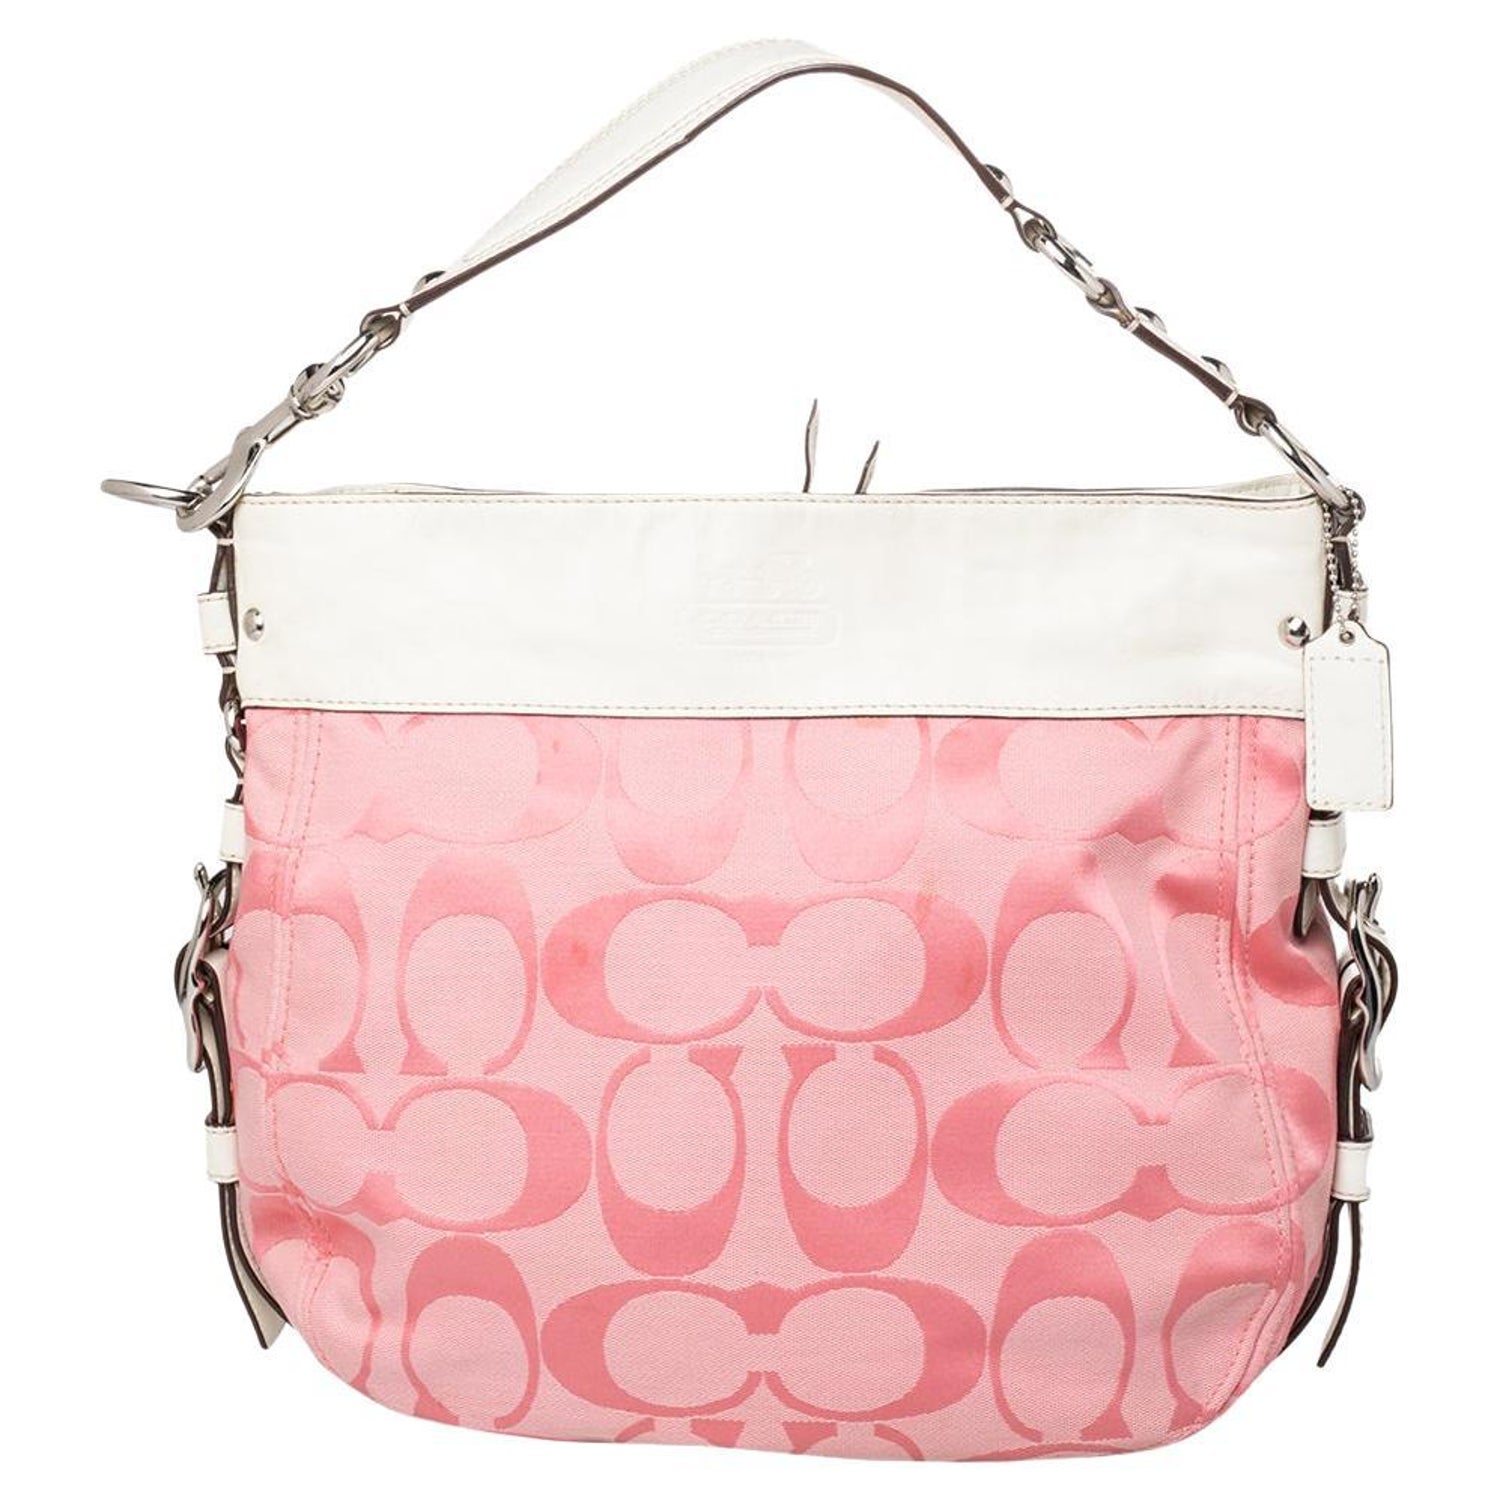 Coach Pink And White Purse - For Sale on 1stDibs | coach pink and white  bag, coach pink bag, coach pink purse